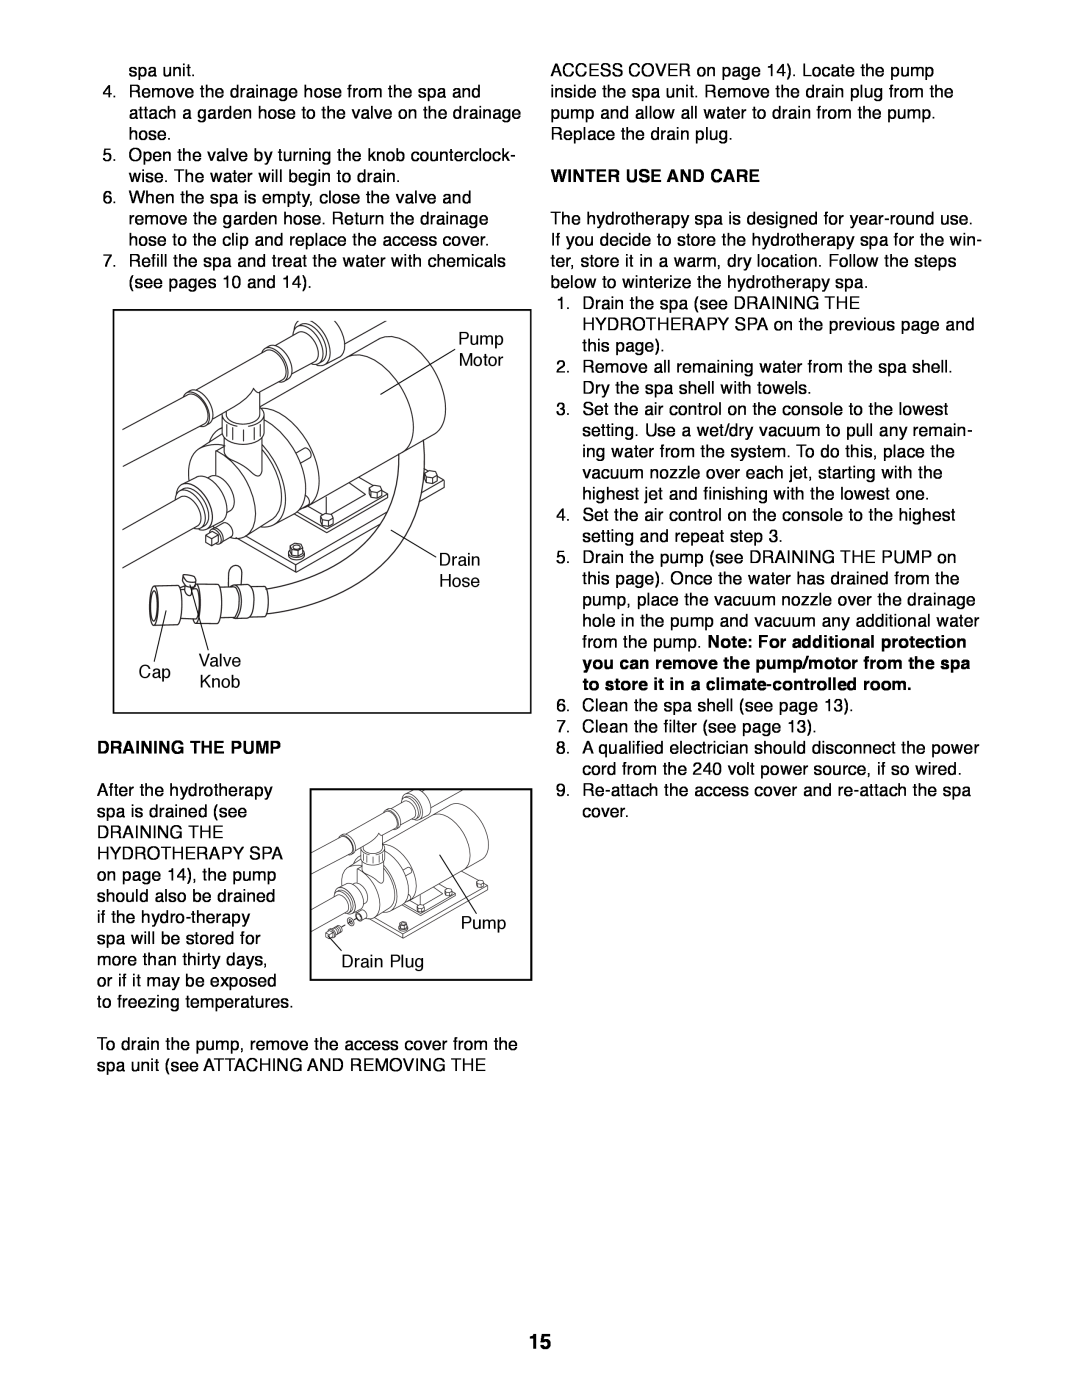 Image IMHS40090 manual Winter Use And Care, from the pump. Note For additional protection, Draining The Pump 